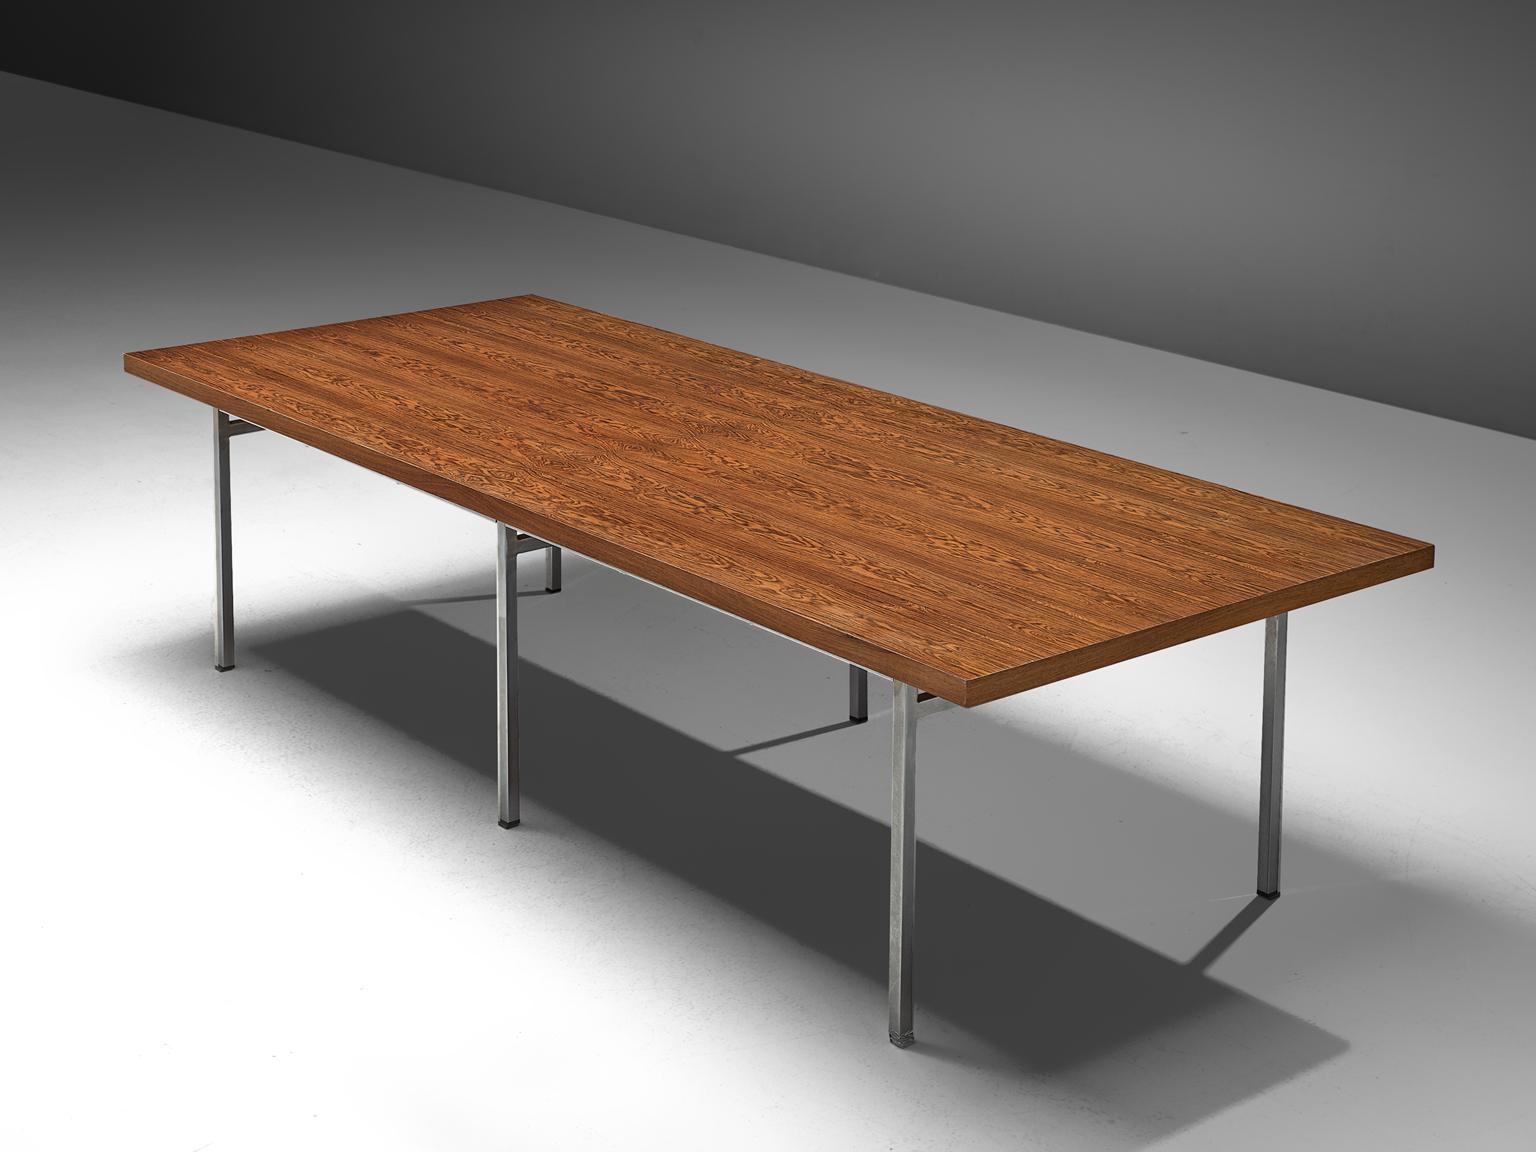 Dining table, rosewood and chromed steel, Germany, 1960s

This modern dining table features a rosewood table top and a chromed steel frame. The frame is executed in thin legs that and a frame that holds up the table top by only a some support